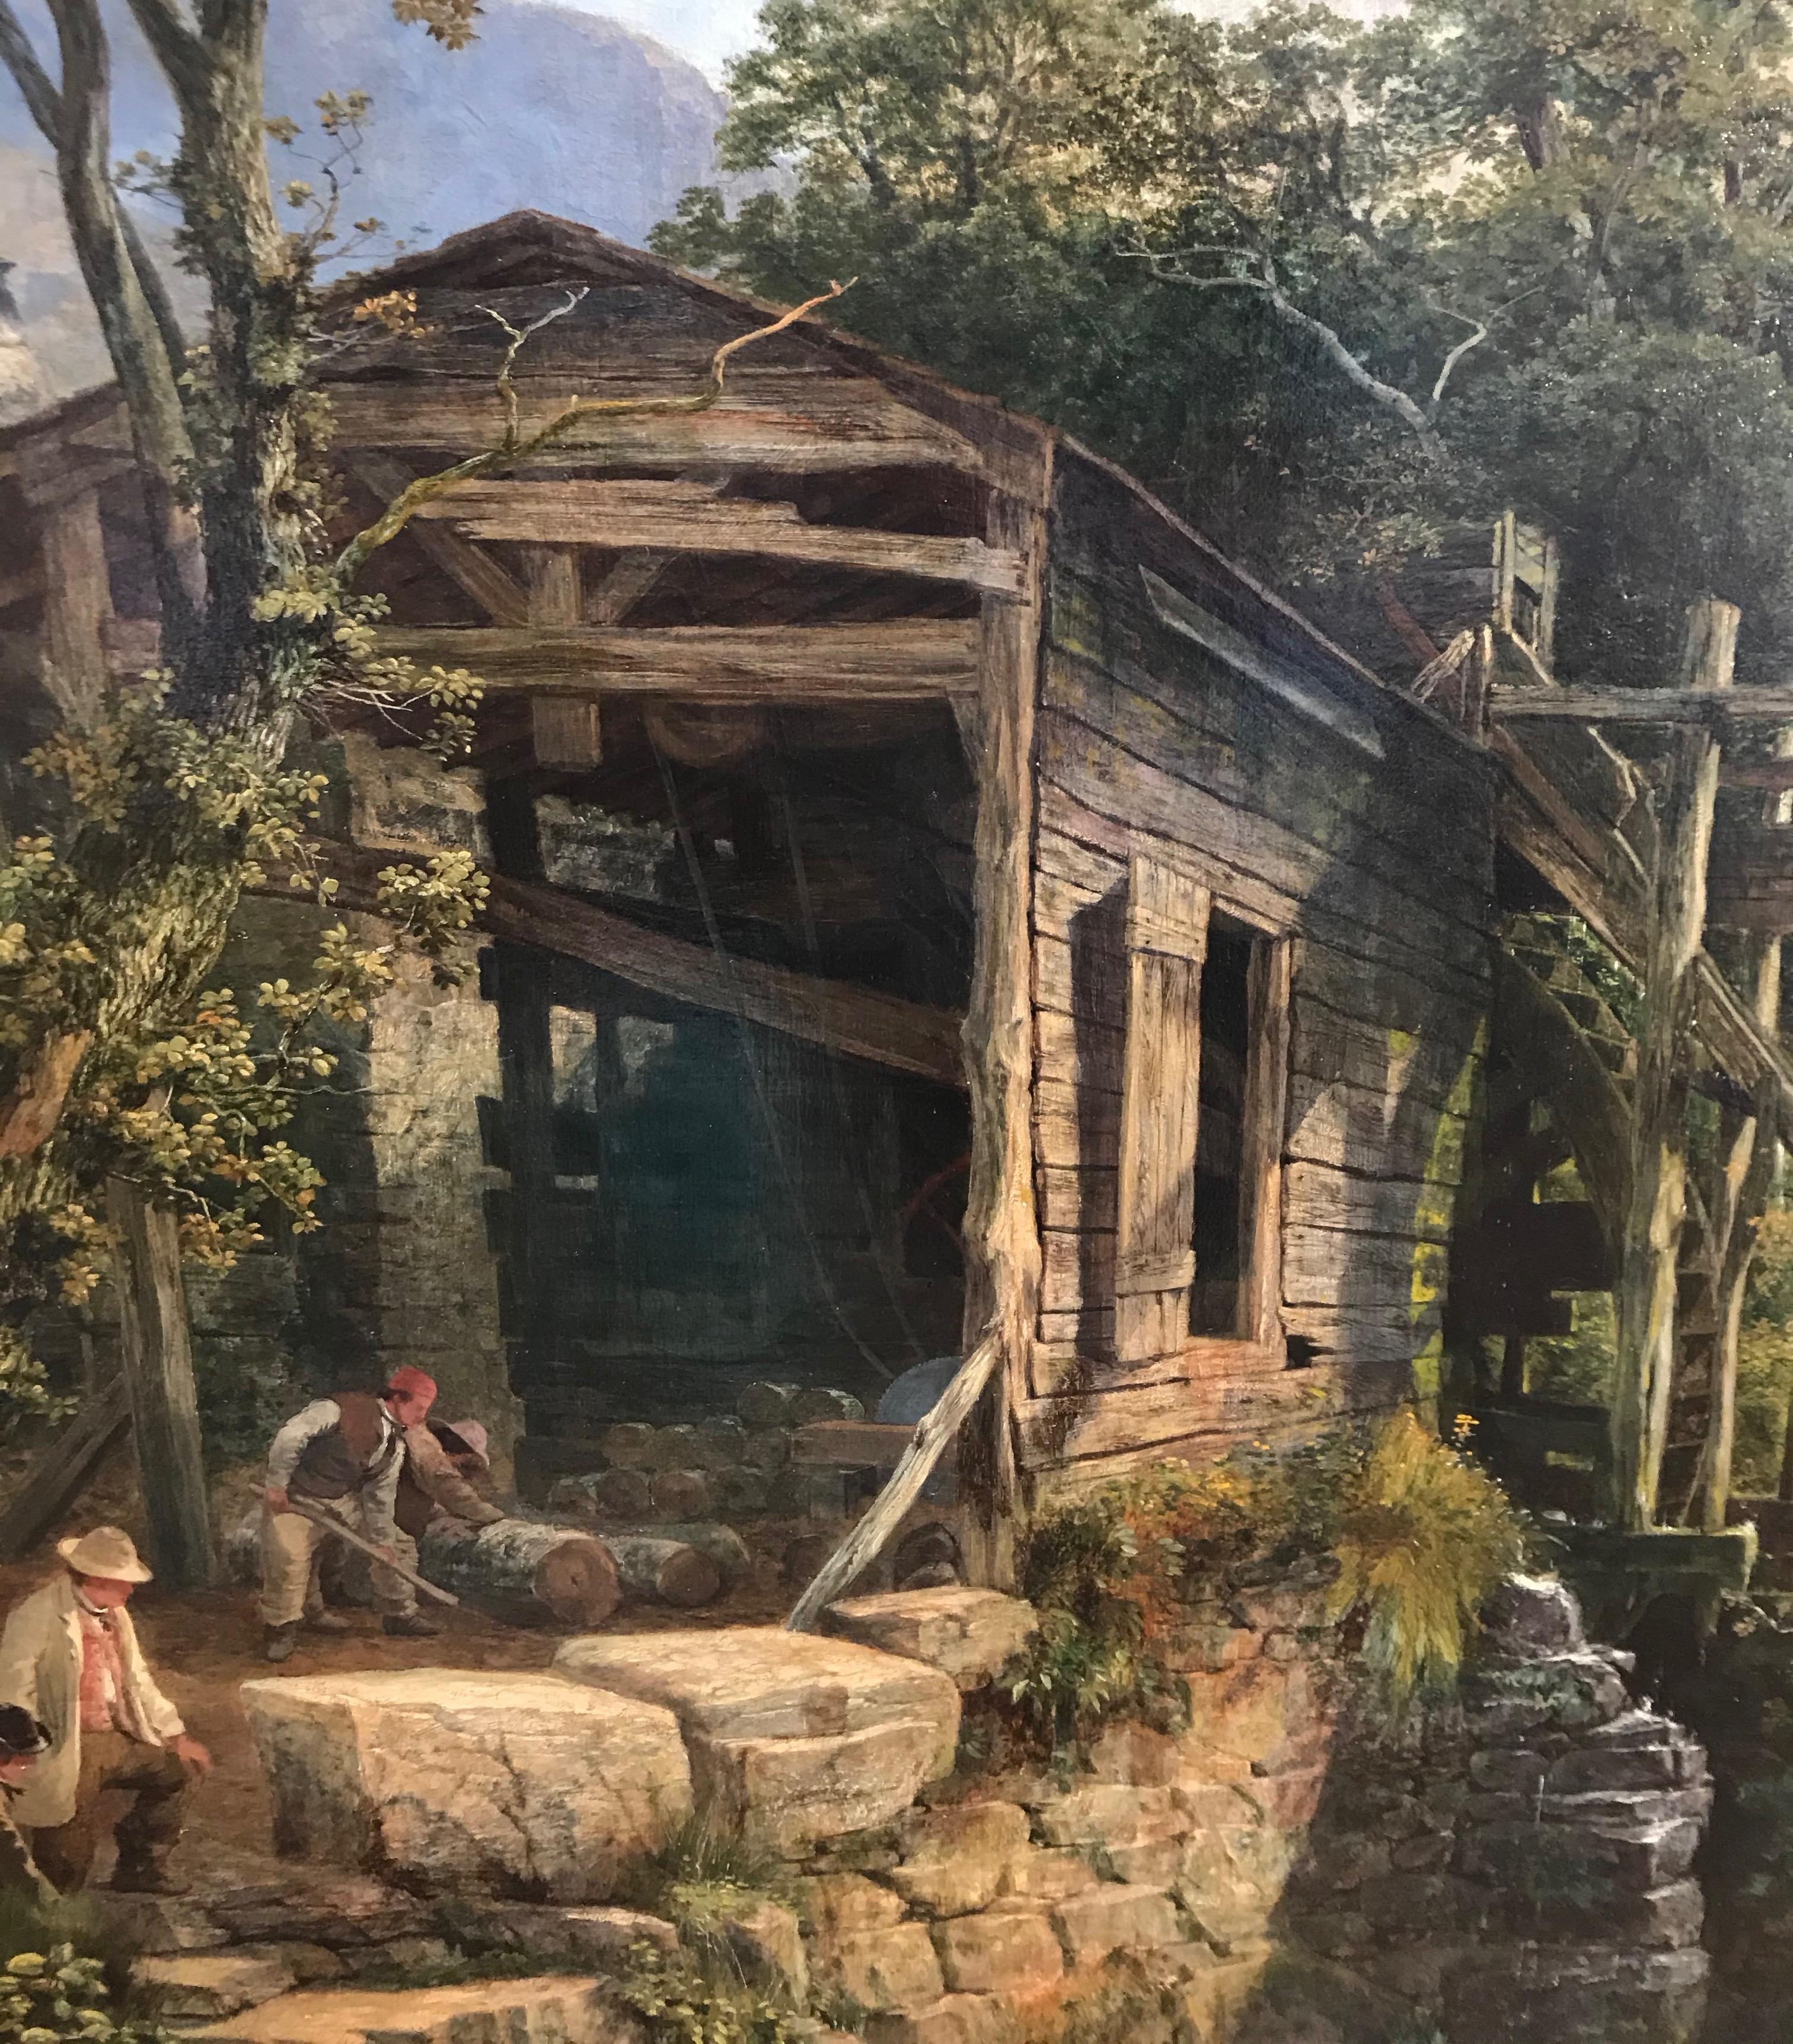 This picturesque view is on an impressively large scale which is appropriate for the monumental work required in the movement and sawing of large timbers. The elegantly dressed figures in the foreground act as focal points in the diagonal meander